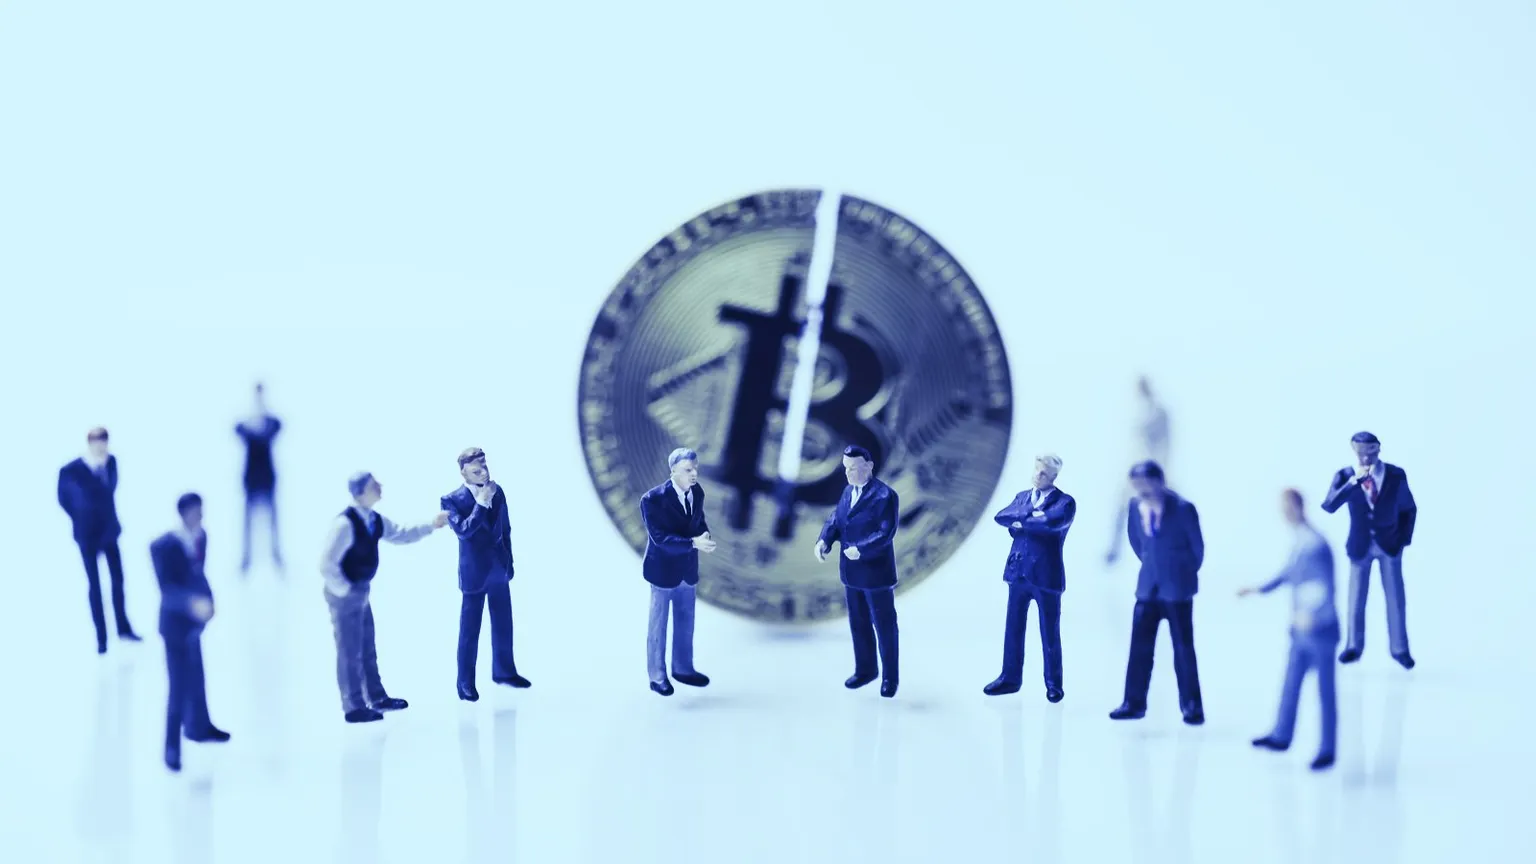 The recent drop in Bitcoin's price has had a major impact on crypto lenders. Image: Shutterstock